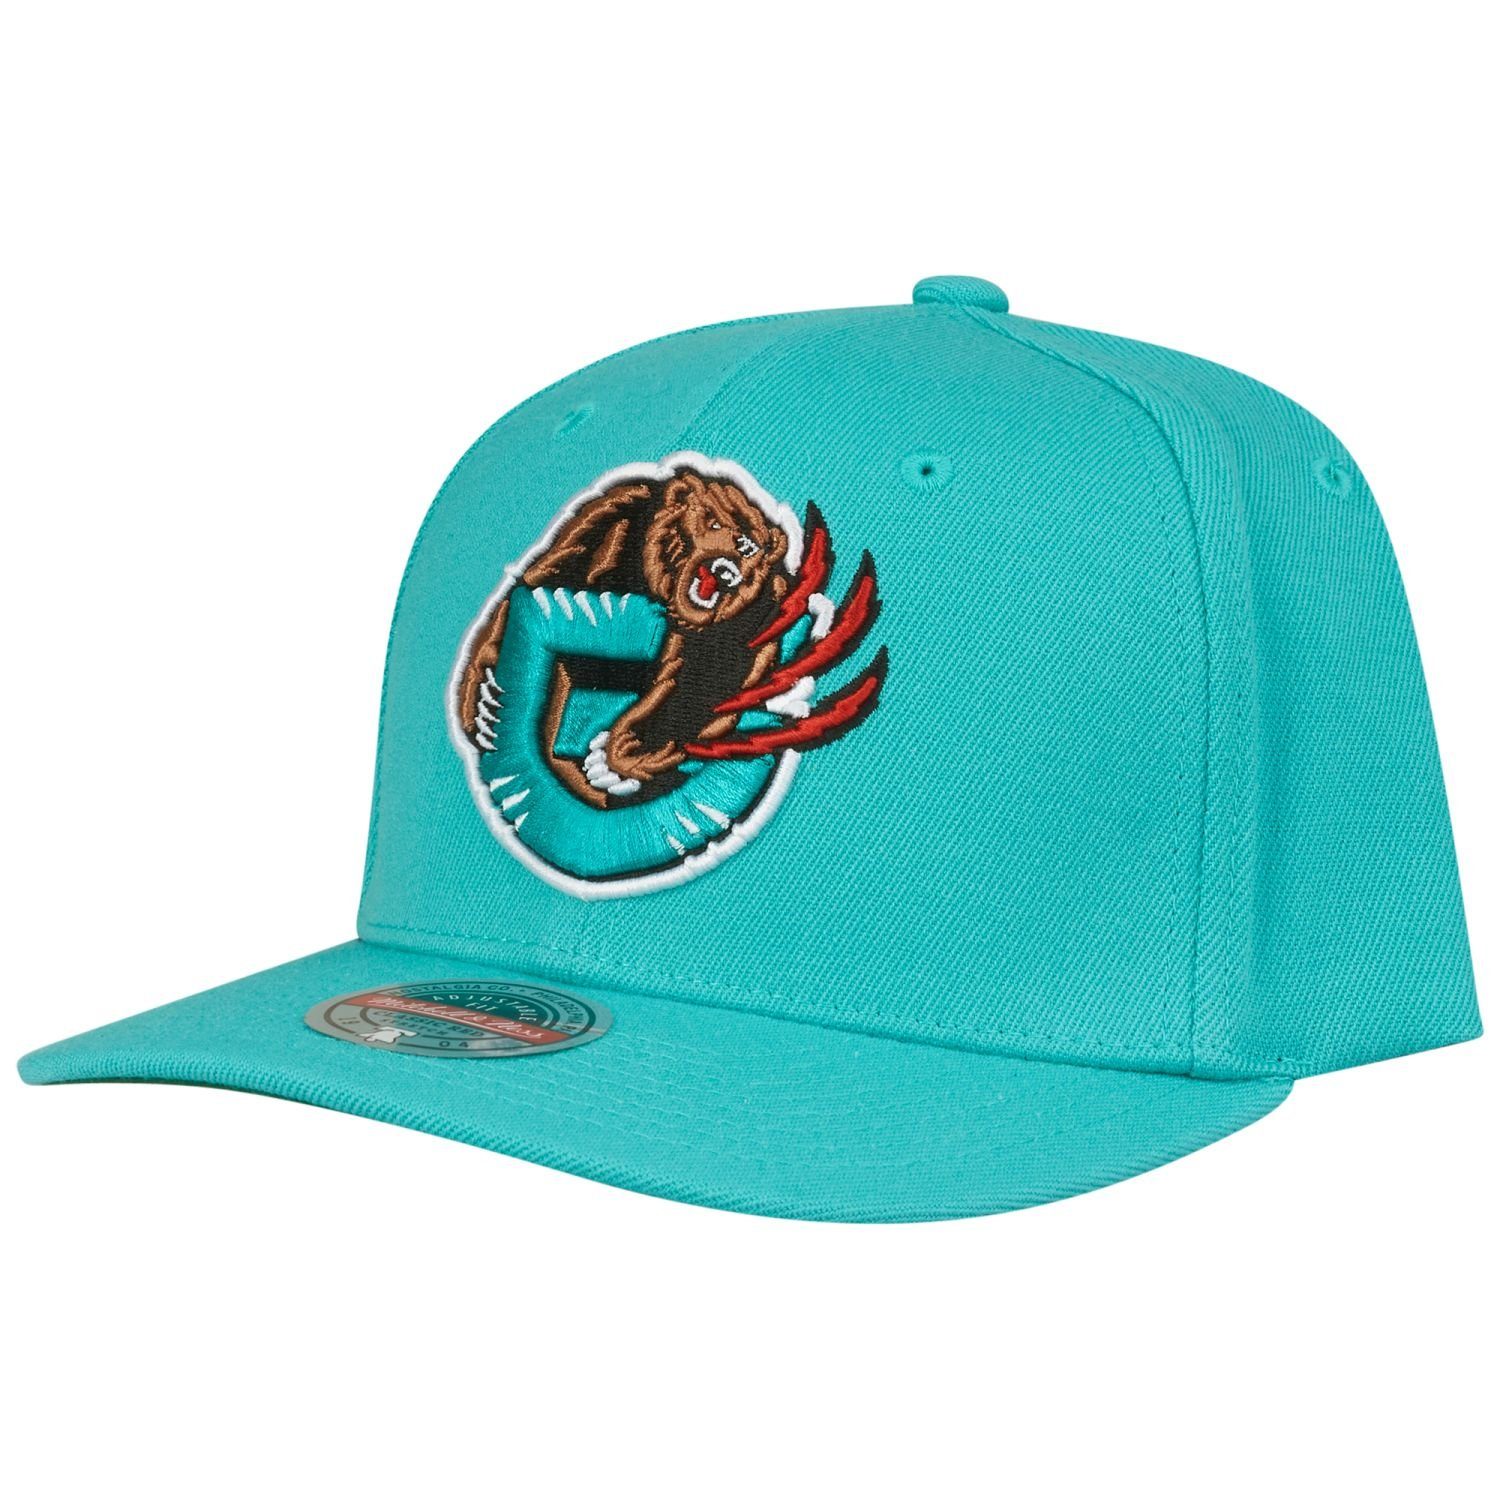 Snapback Cap HWC Ness & Mitchell Stretch Vancouver Grizzlies